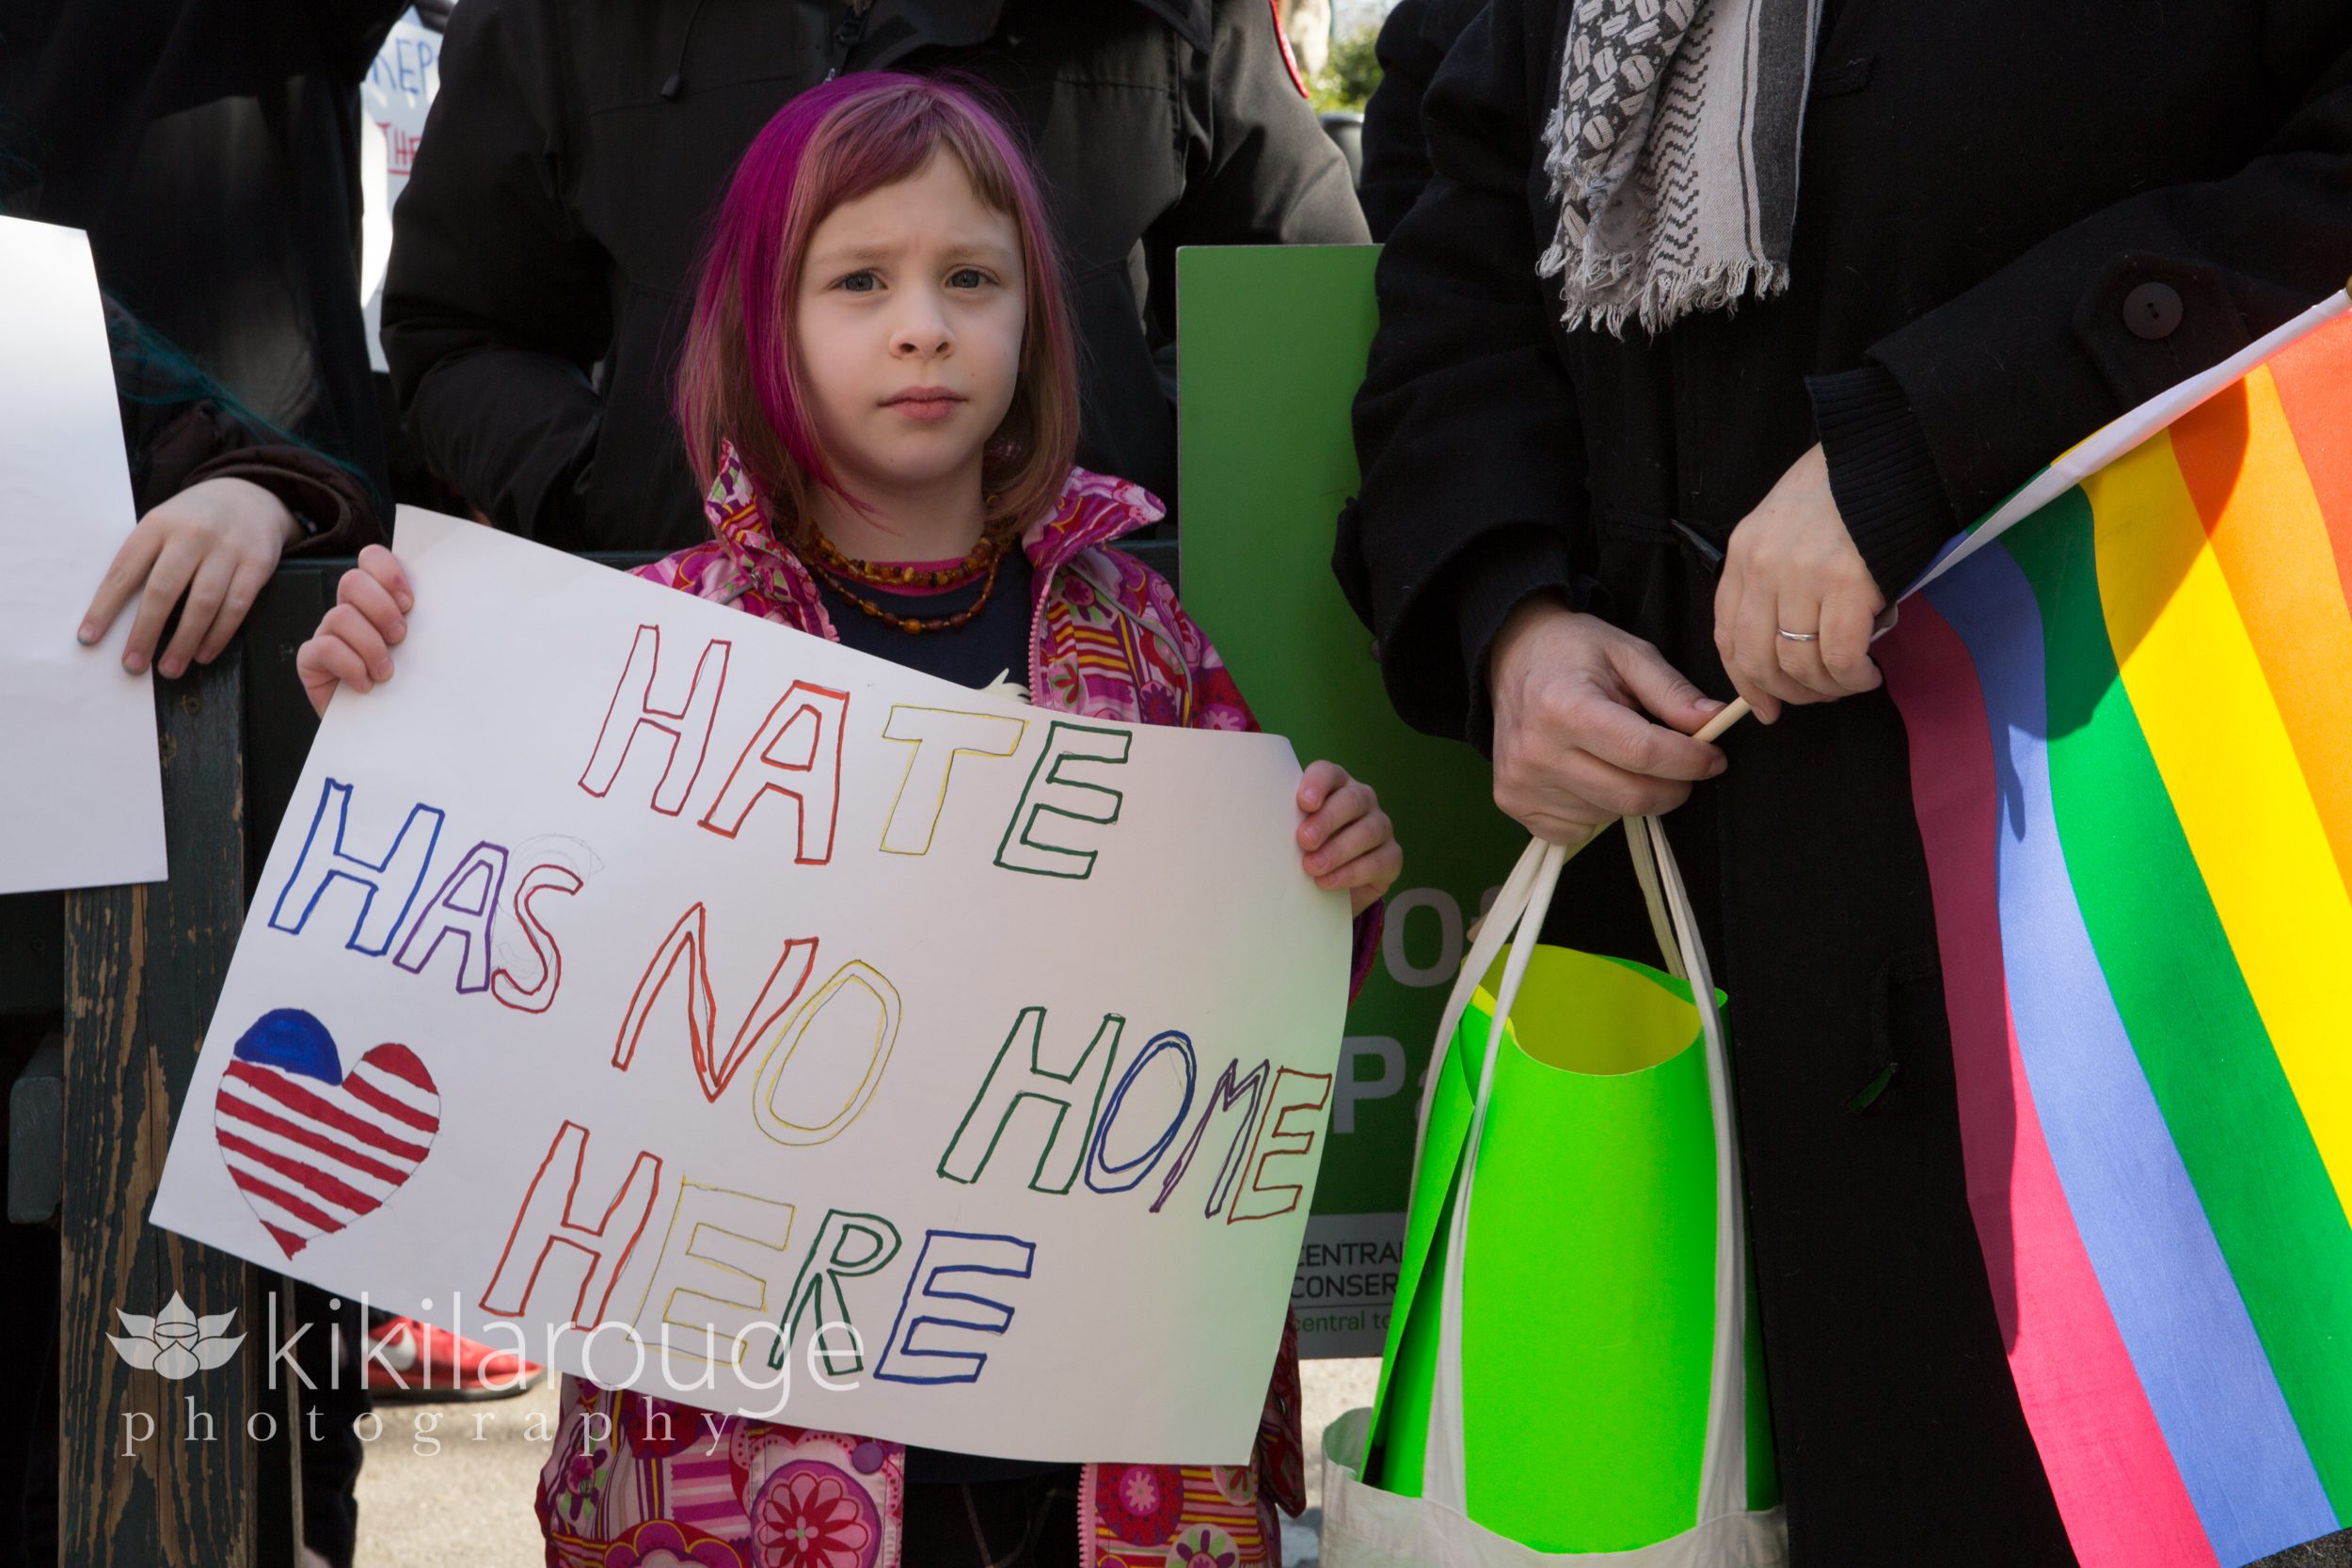 Hate has no room here sign by little girl